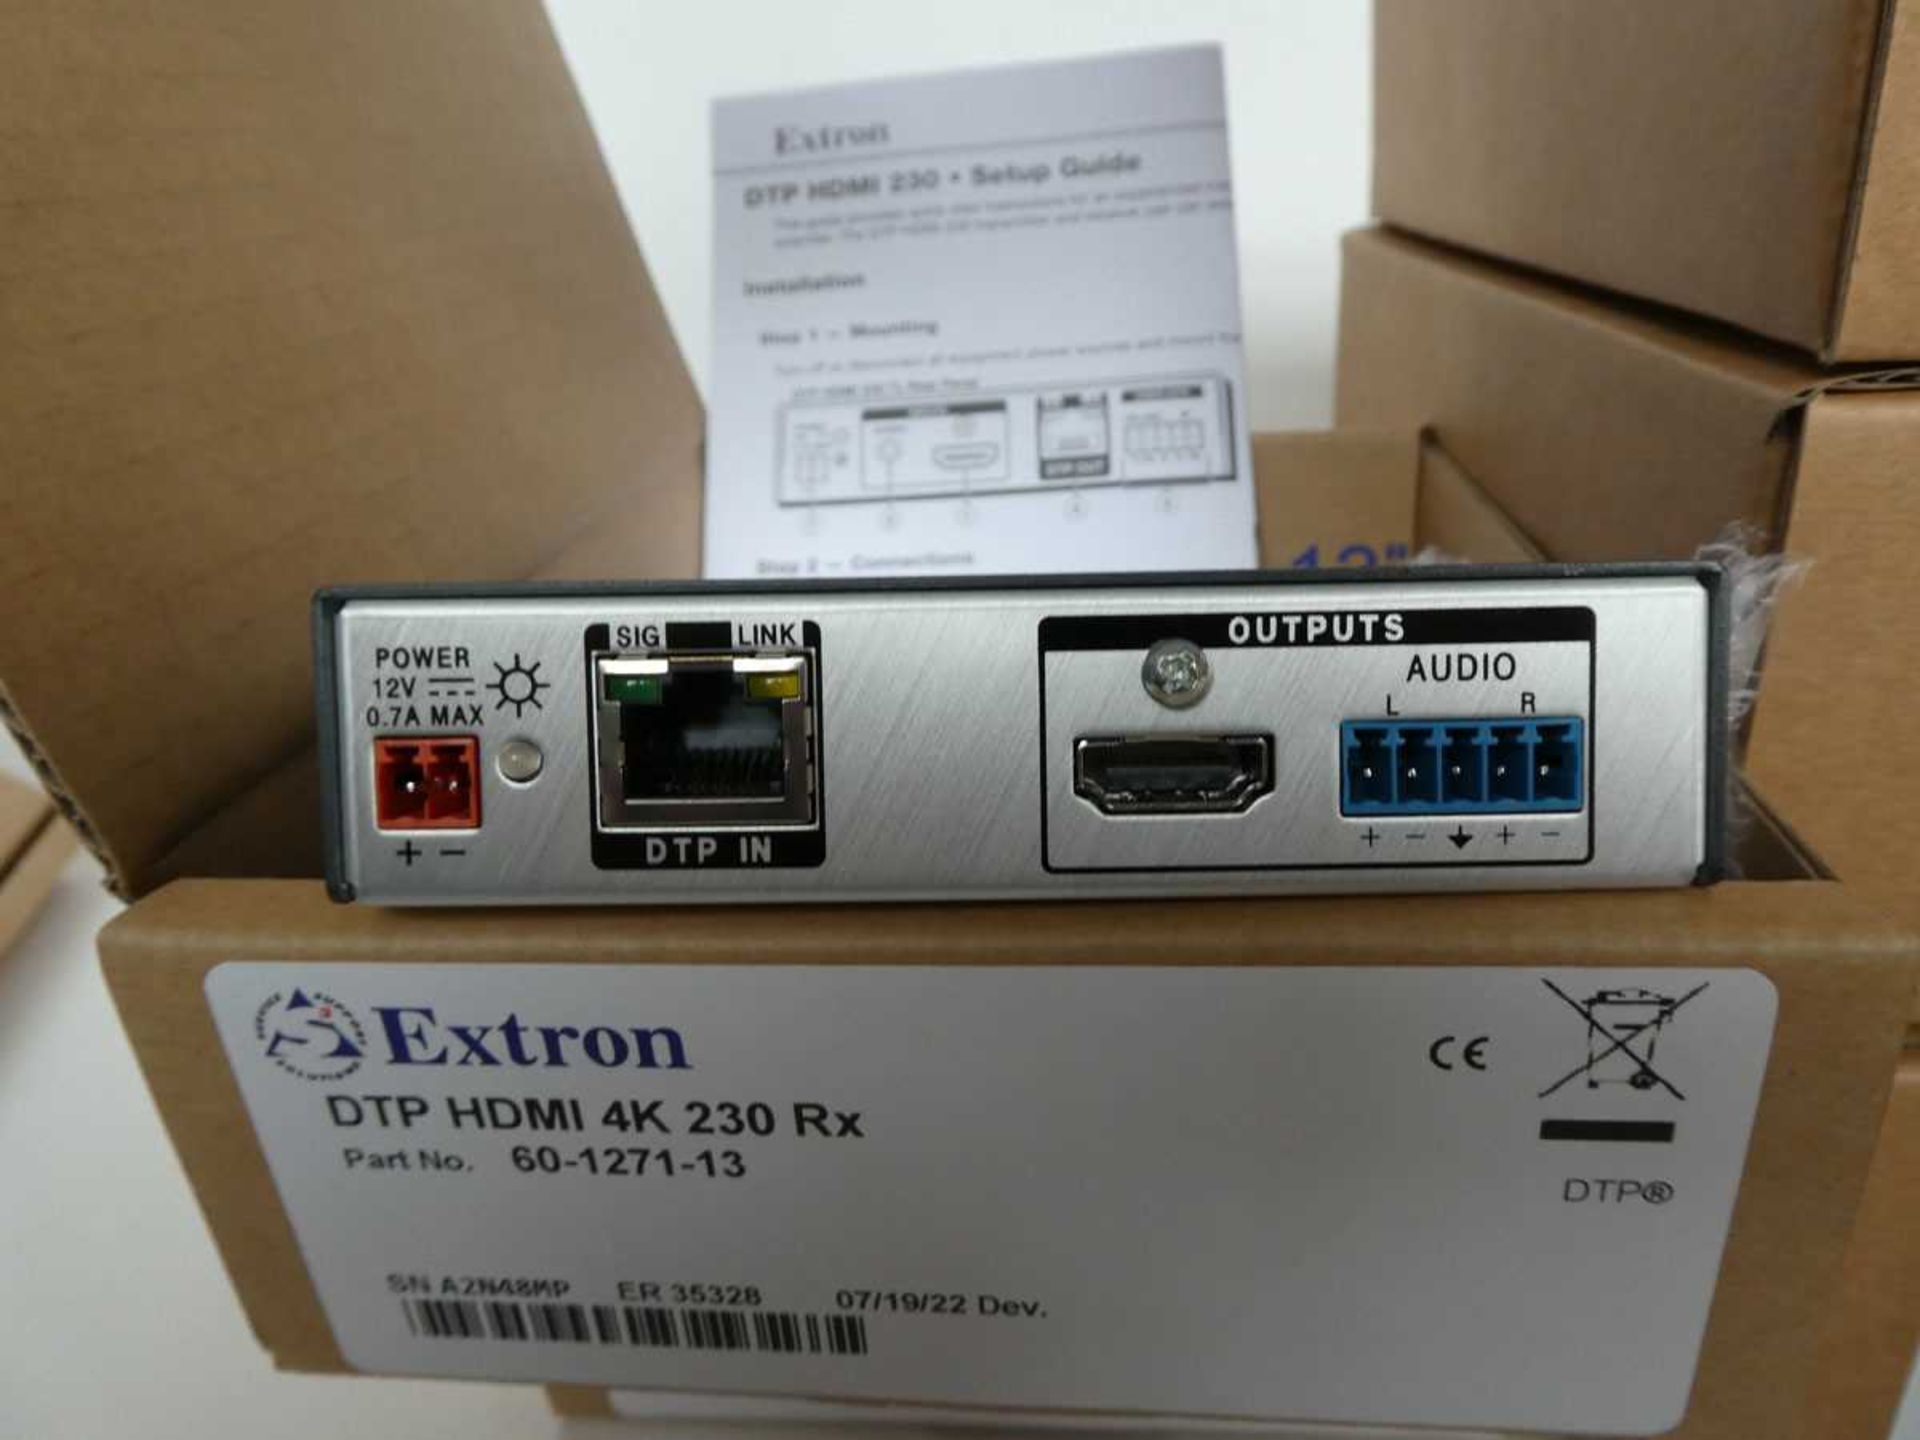 +VAT 5x boxes including 3 Extron DTP HDMI 4K 230 TX transmitters with power supply and boxes, and - Bild 4 aus 6